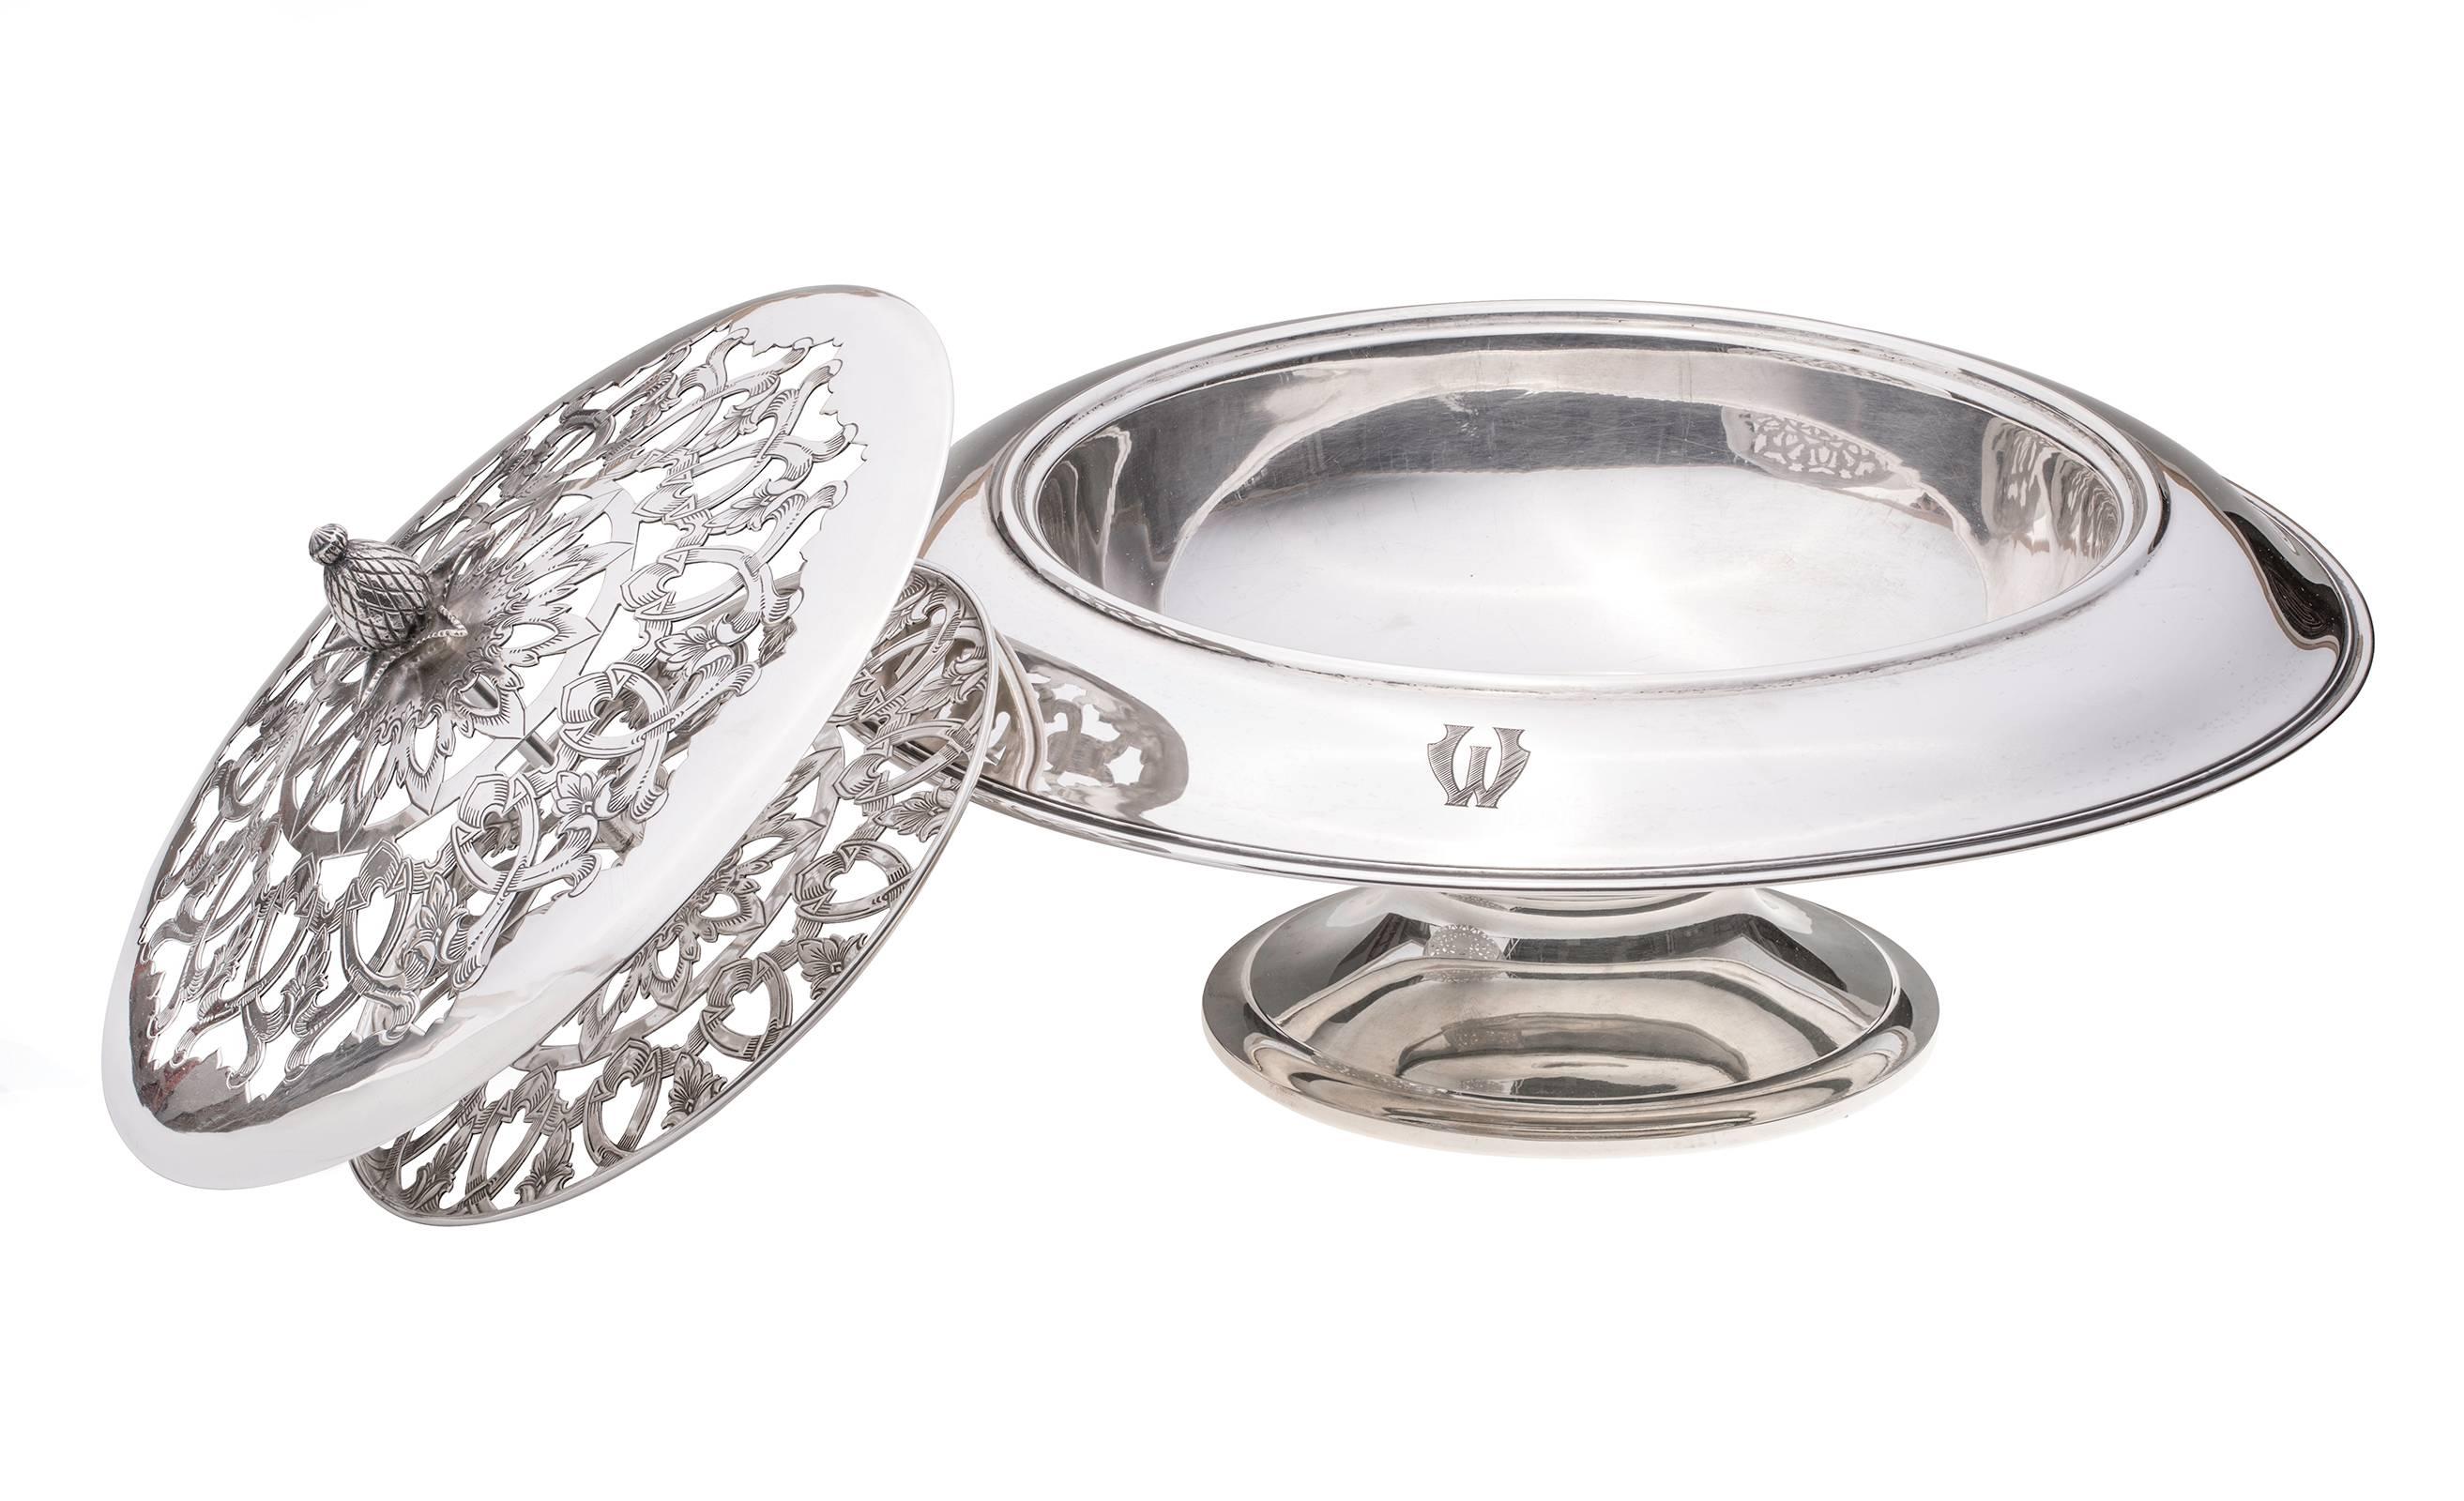 Shreve Treat & Eacret sterling silver flower frog bowl. Double lid is pierced in floral design for placing cut flowers.
Pineapple center knob for easy lid removal.
Very beautiful decorative centerpiece for your table. Monogrammed 'M or 'W' on the